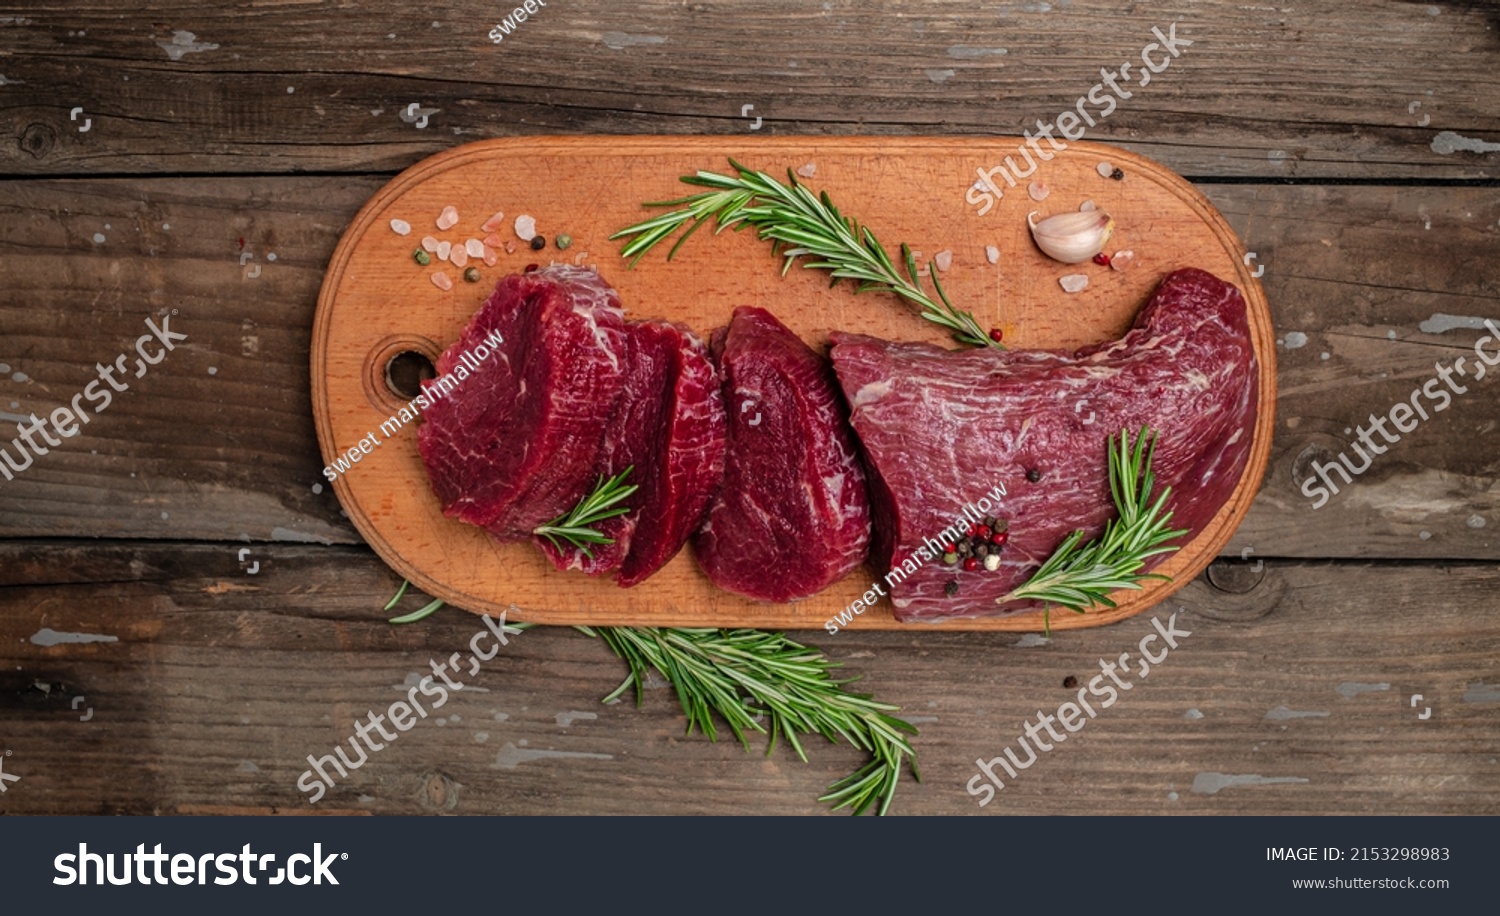 Beef Tenderloin fillet with rosemary and spices. Preparing fresh beef steak ready to cook, Long banner format. Restaurant menu, dieting, cookbook recipe. place for text. top view. #2153298983